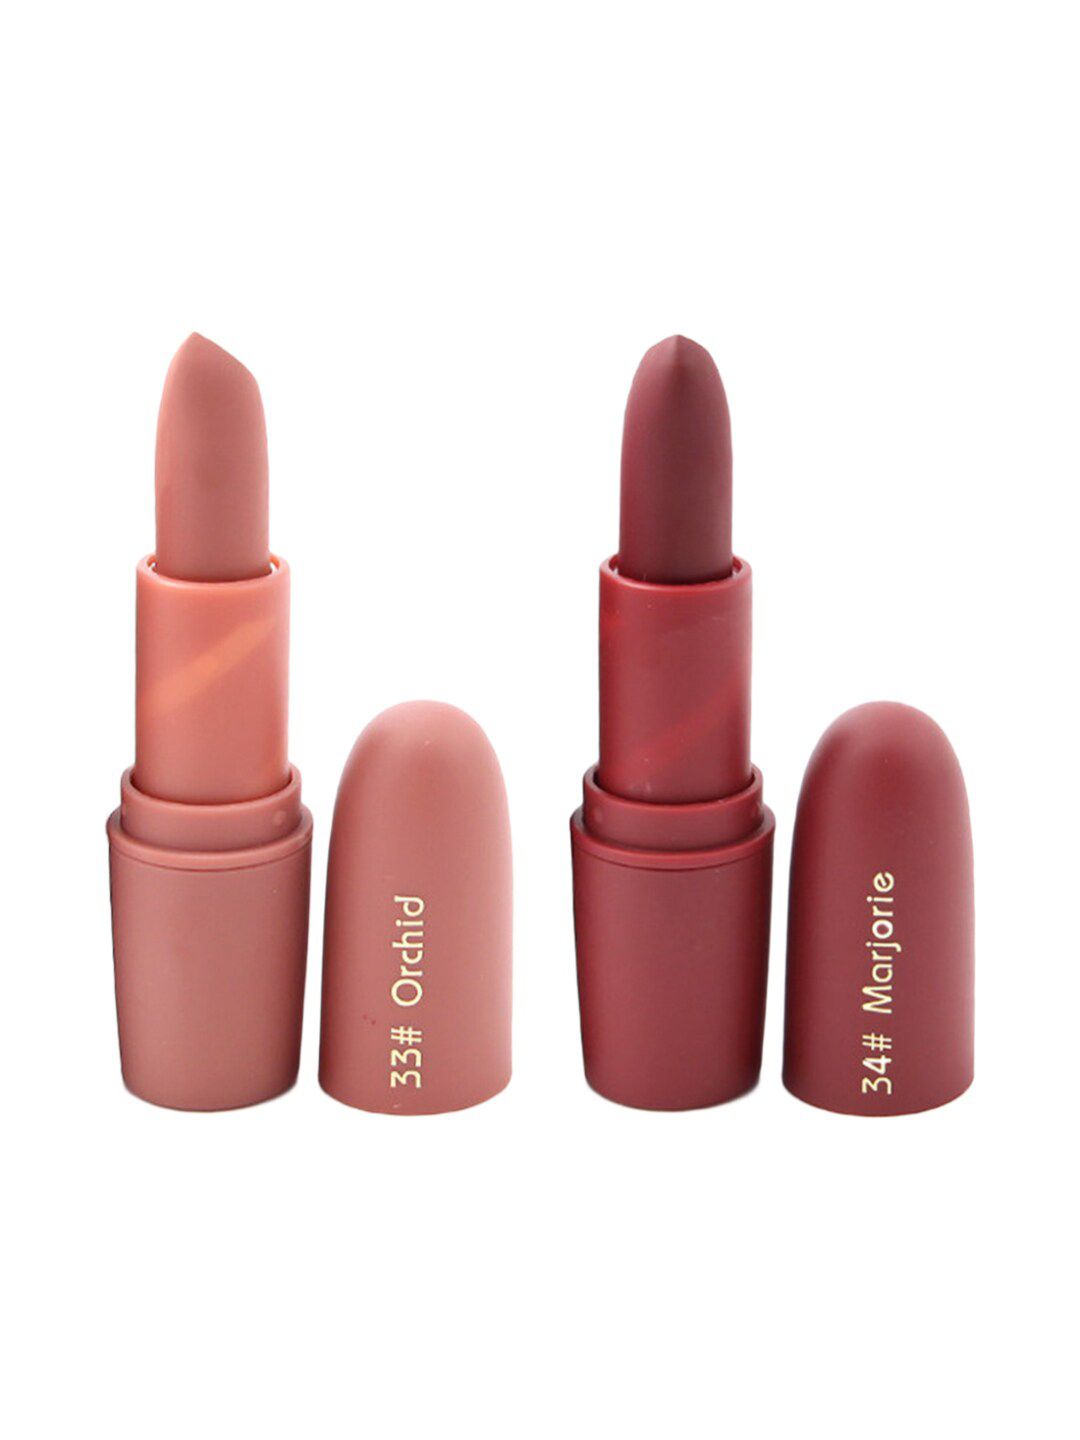 MISS ROSE Professional Make-Up Set of 2 Matte Creamy Lipsticks - Orchid 33 & Marjorie 34 Price in India